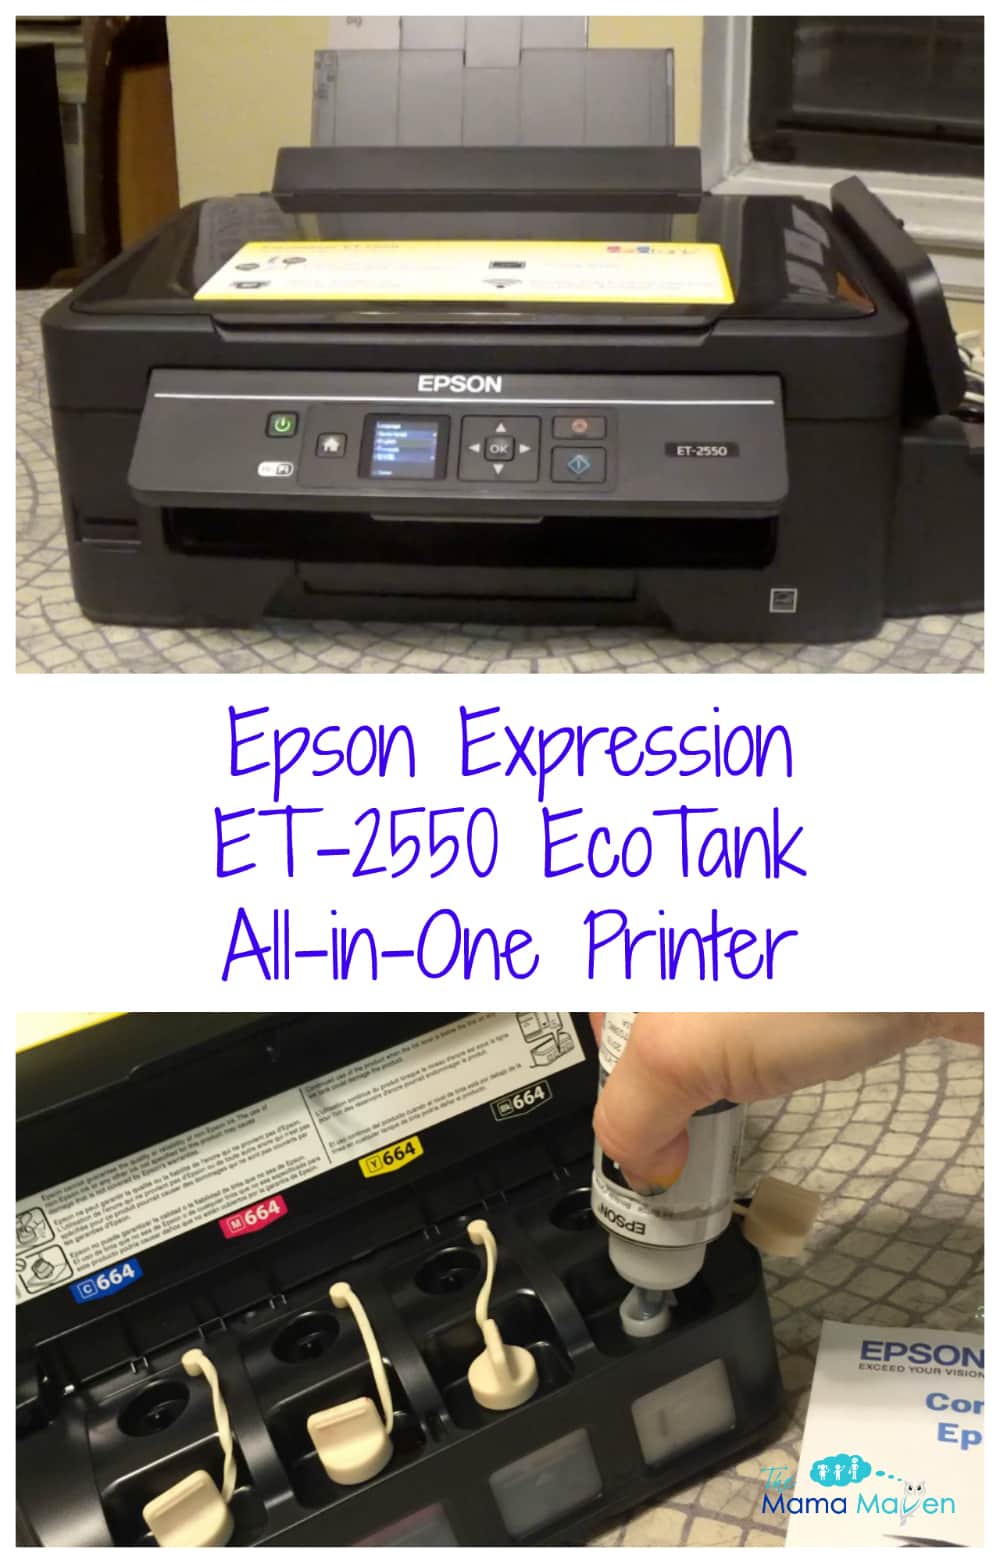 Epson Expression Et 2550 Ecotank All In One Printer Review 2351